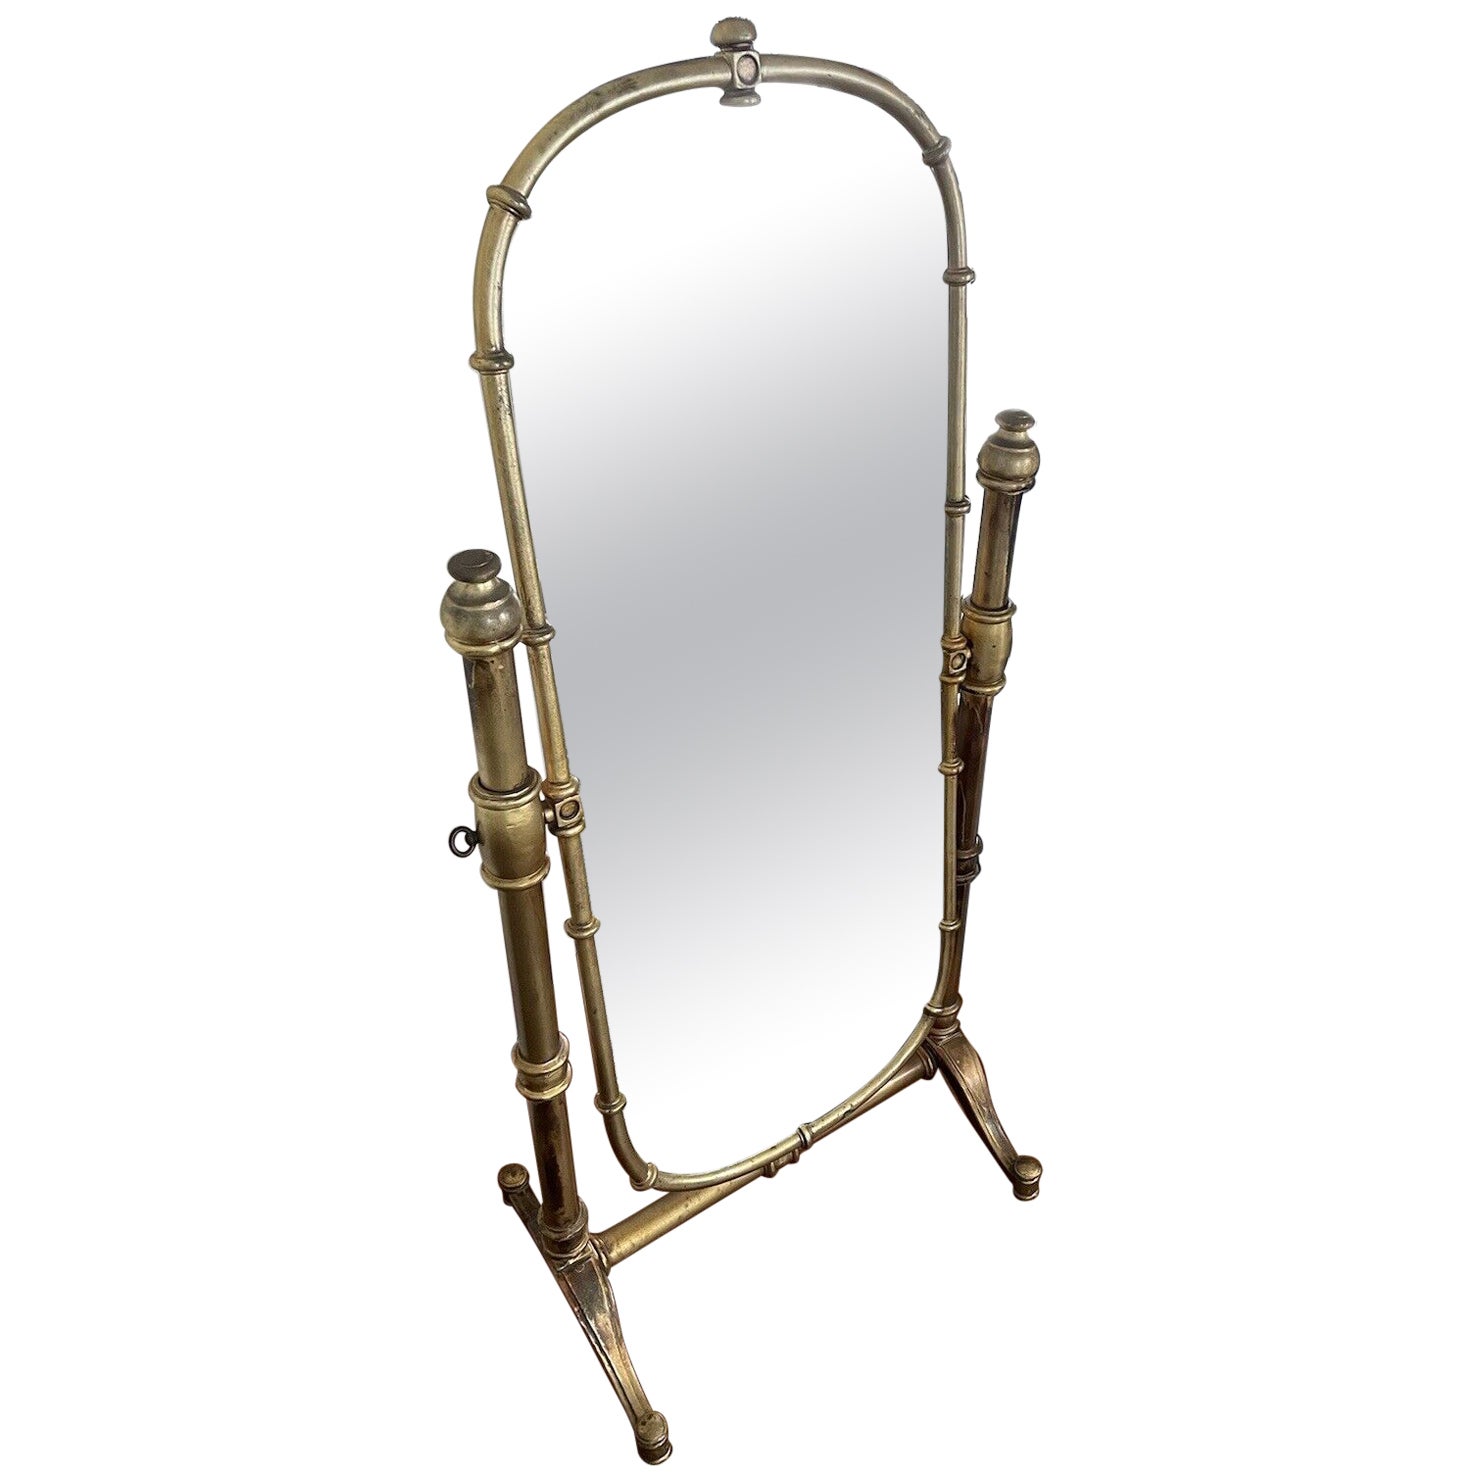 Vintage Campaign-Style Florentine Painted Cheval Faux Bamboo Floor Mirror